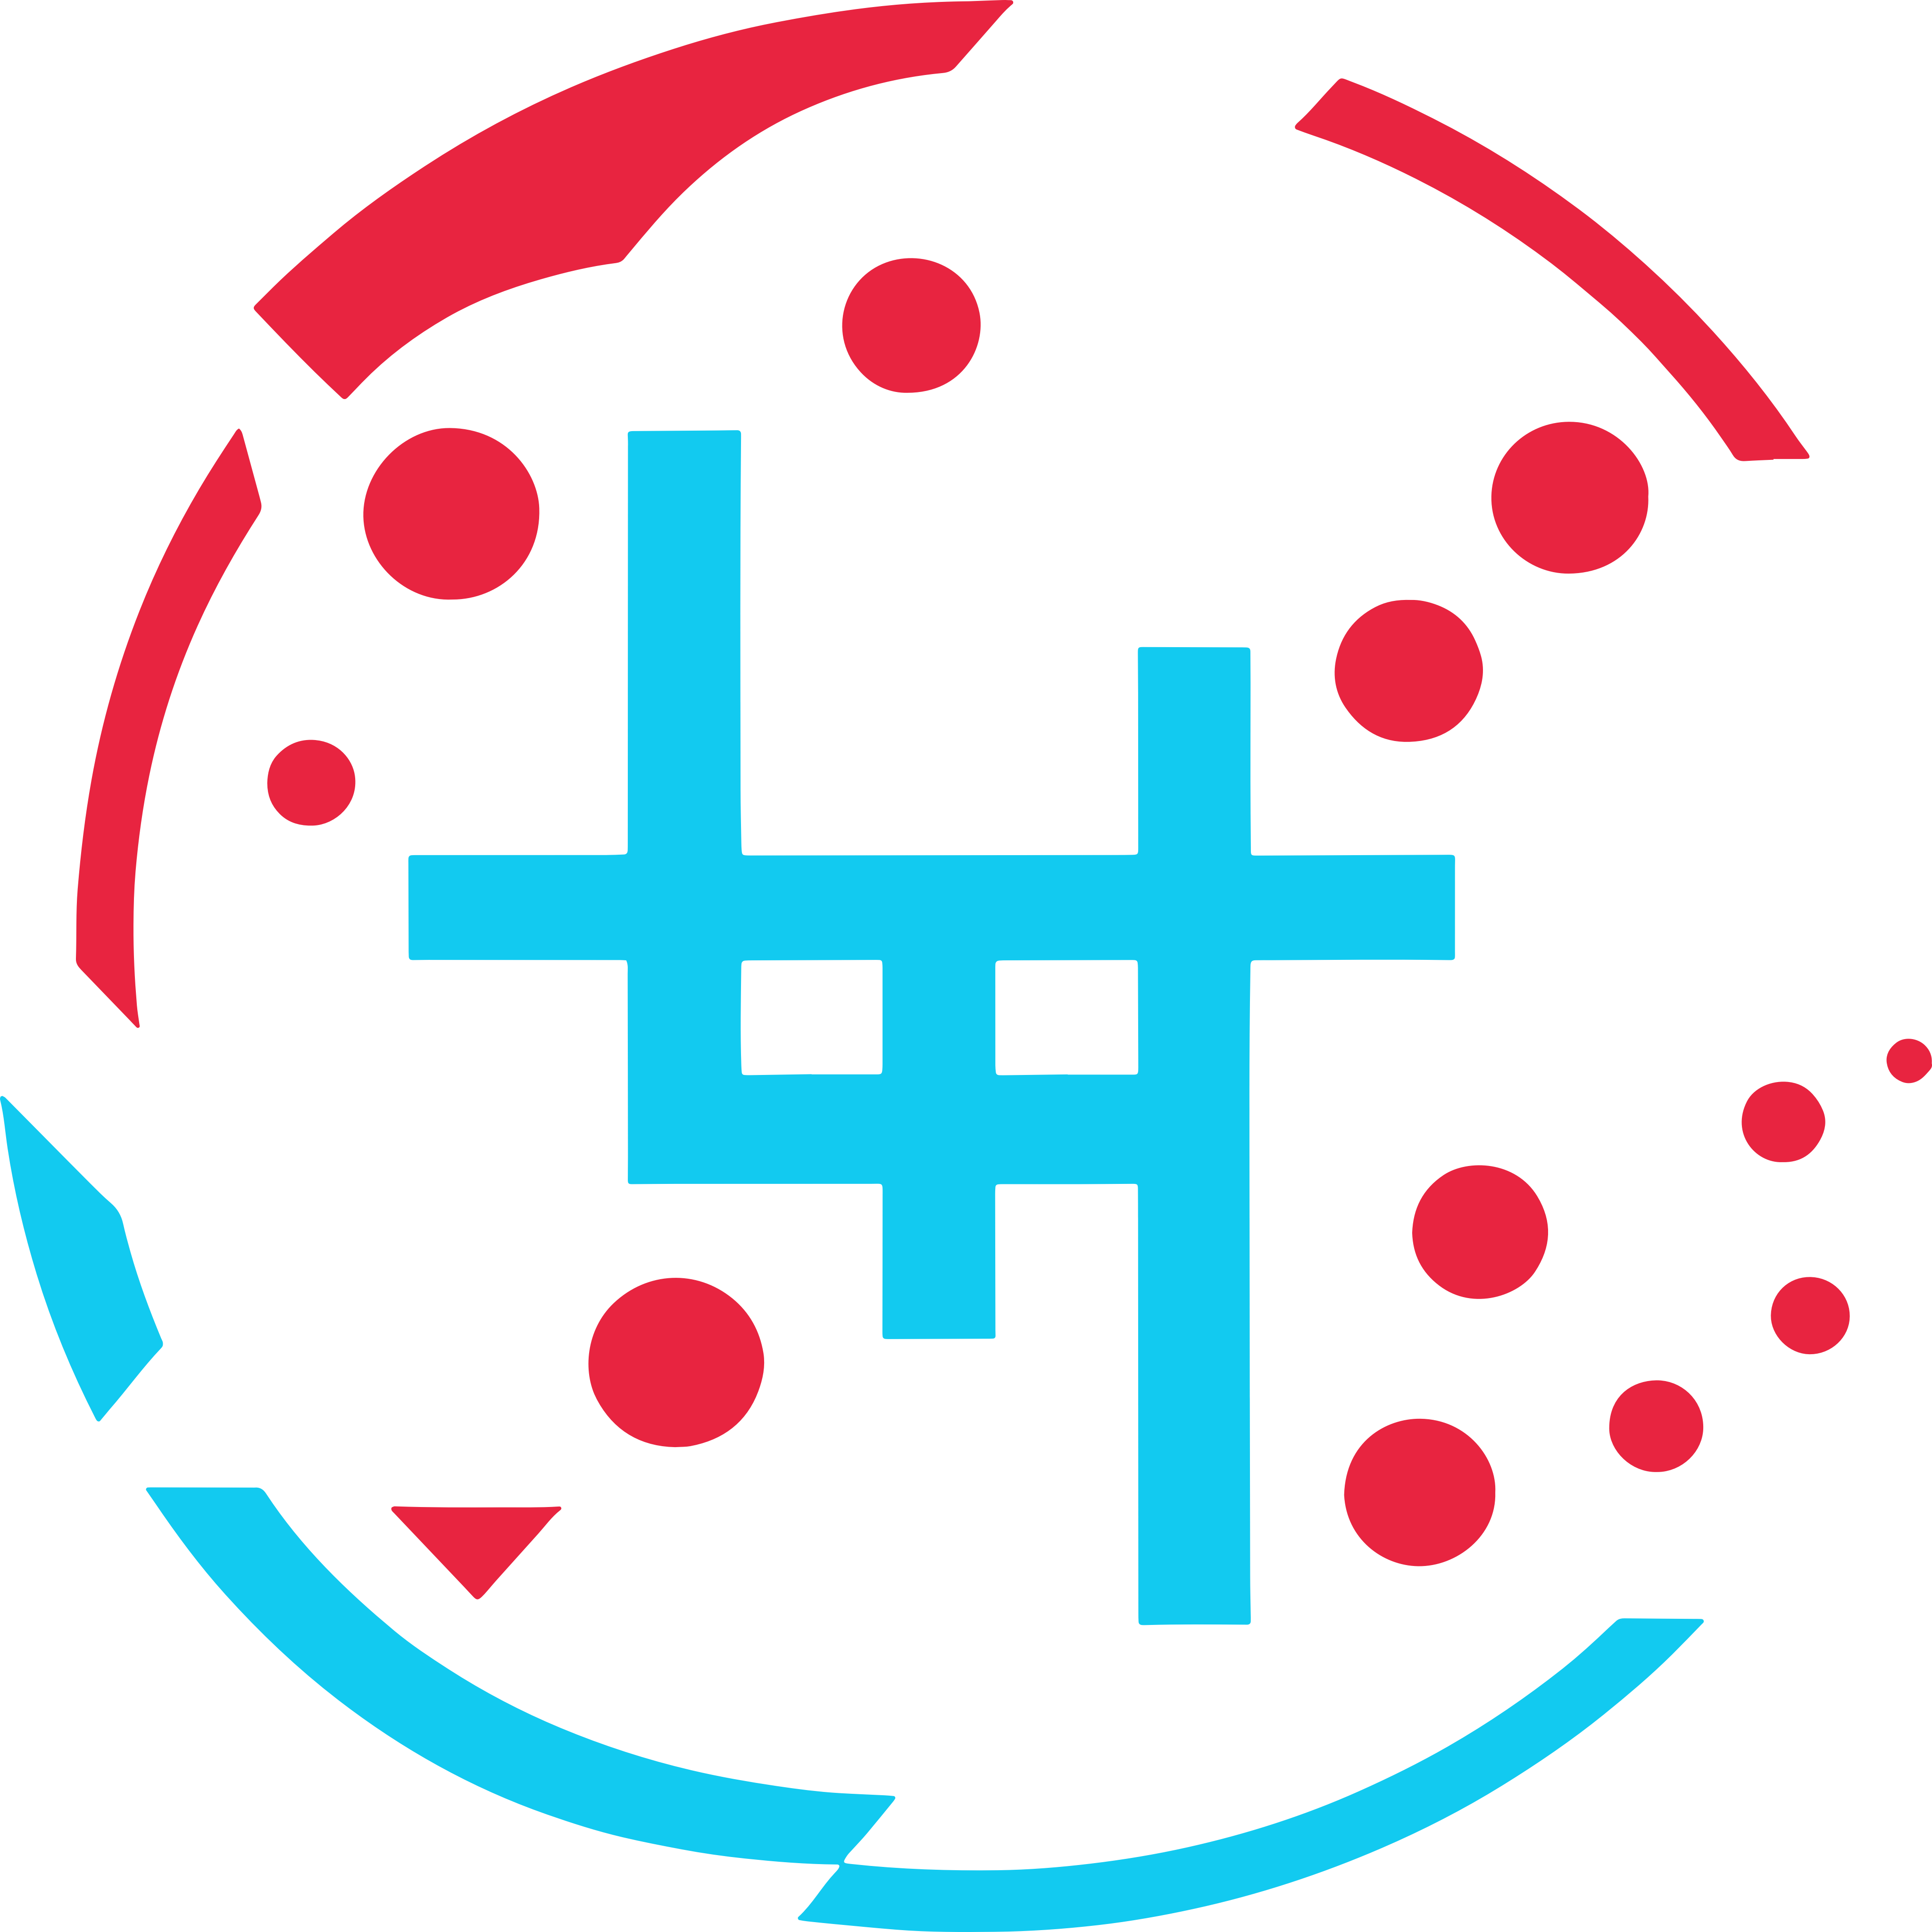 Logo of Hash (HSH), a Quantum-Resistant Cryptographic Hash Library